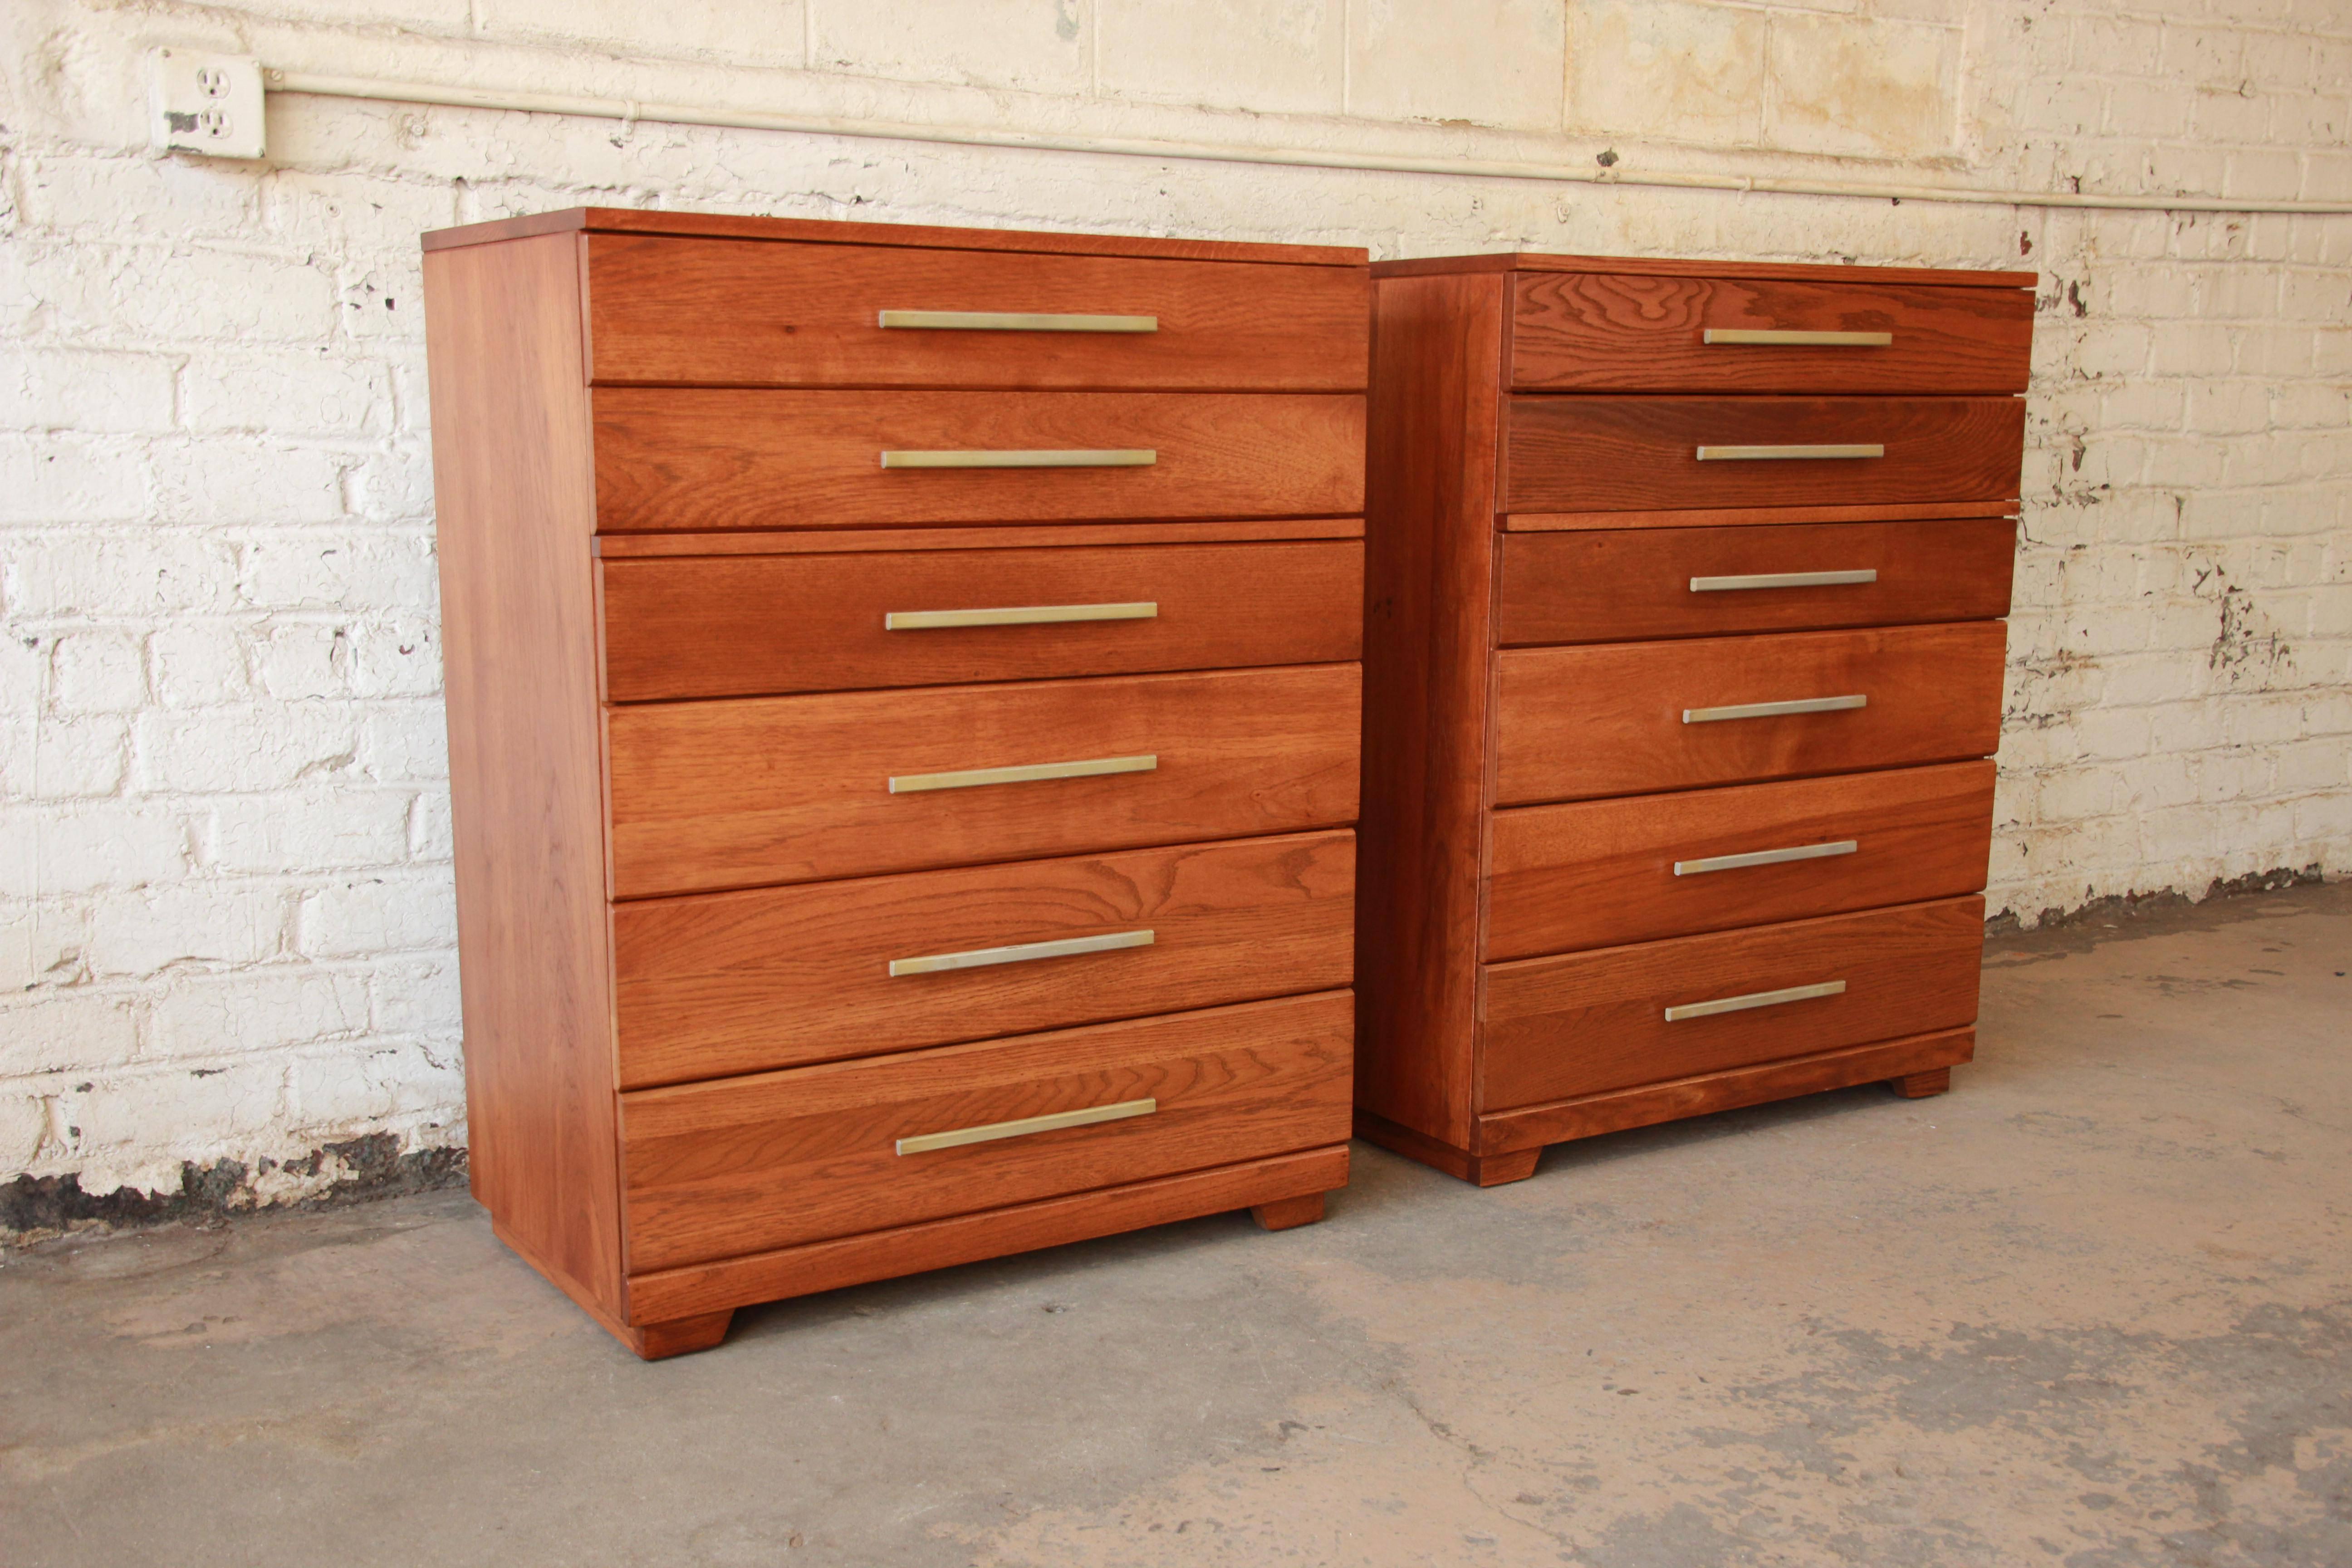 Exceptional pair of Mid-Century Modern solid oak highboy dressers by iconic designer Raymond Loewy for Mengel Furniture. These minimalist dressers feature clean, sleek Mid-Century lines and beautiful wood grain. The aluminum drawer pulls are